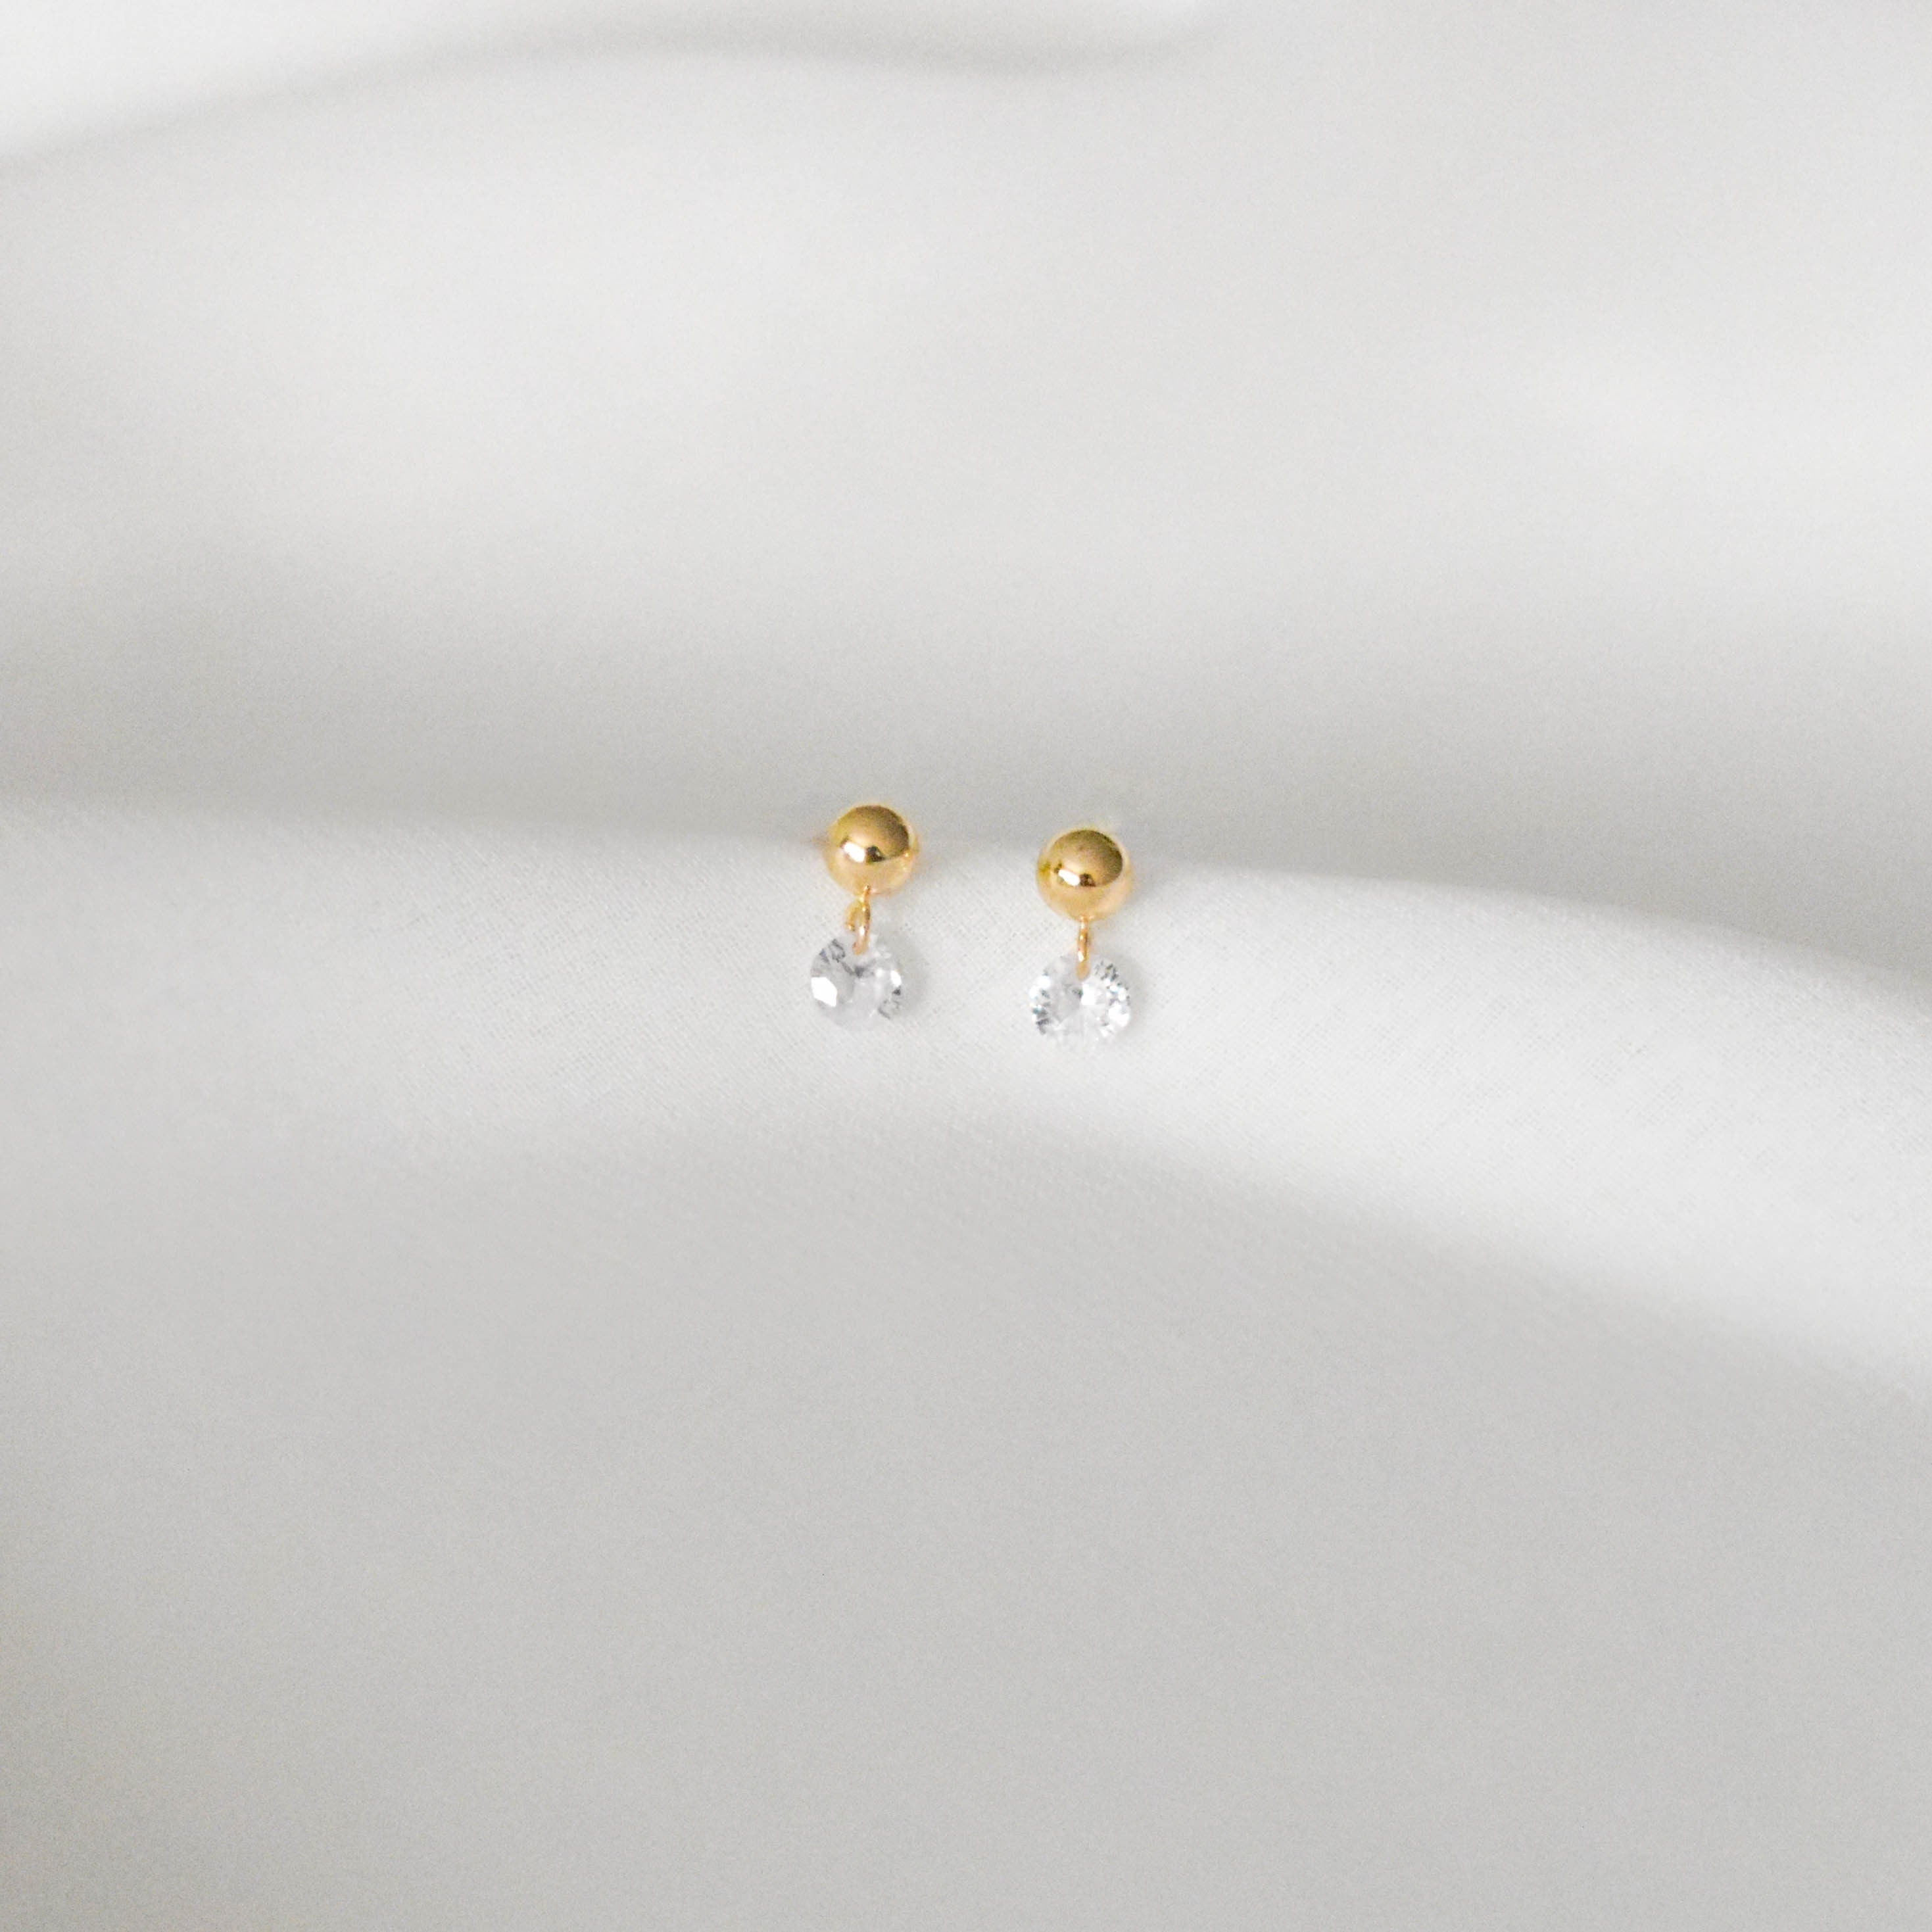 14K SOLID Gold cz Stud Earrings - Real Gold Earrings, Solid Gold Earrings, Real Gold Stud Earrings, cz earrings, solid dangle earrings |SGE00007